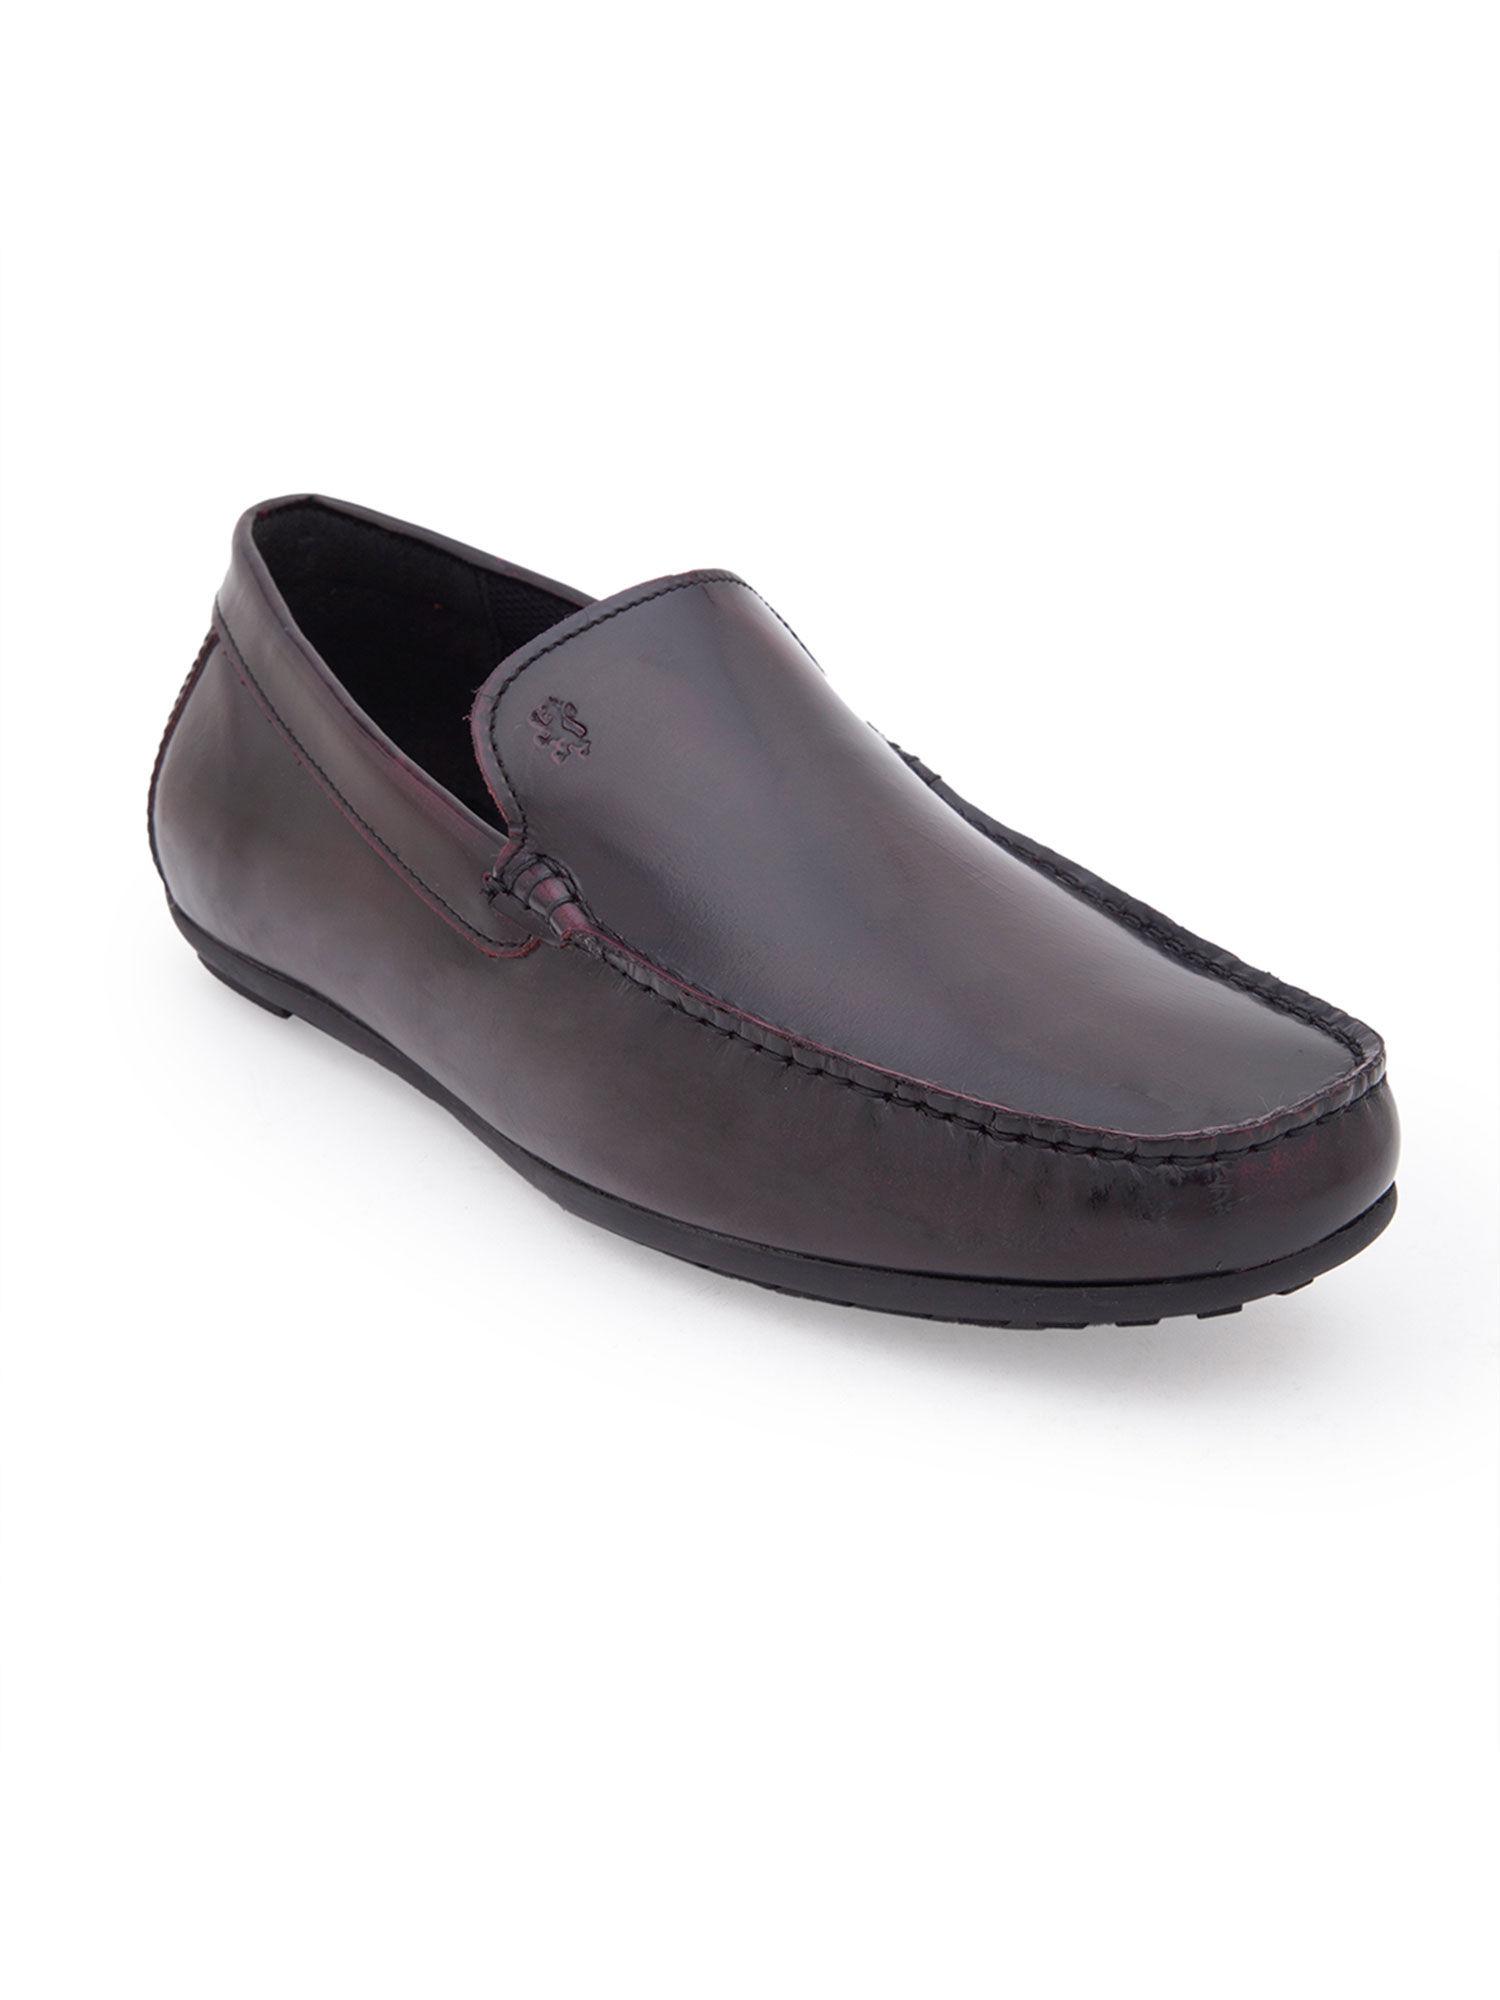 solid brown slip-on dress shoes